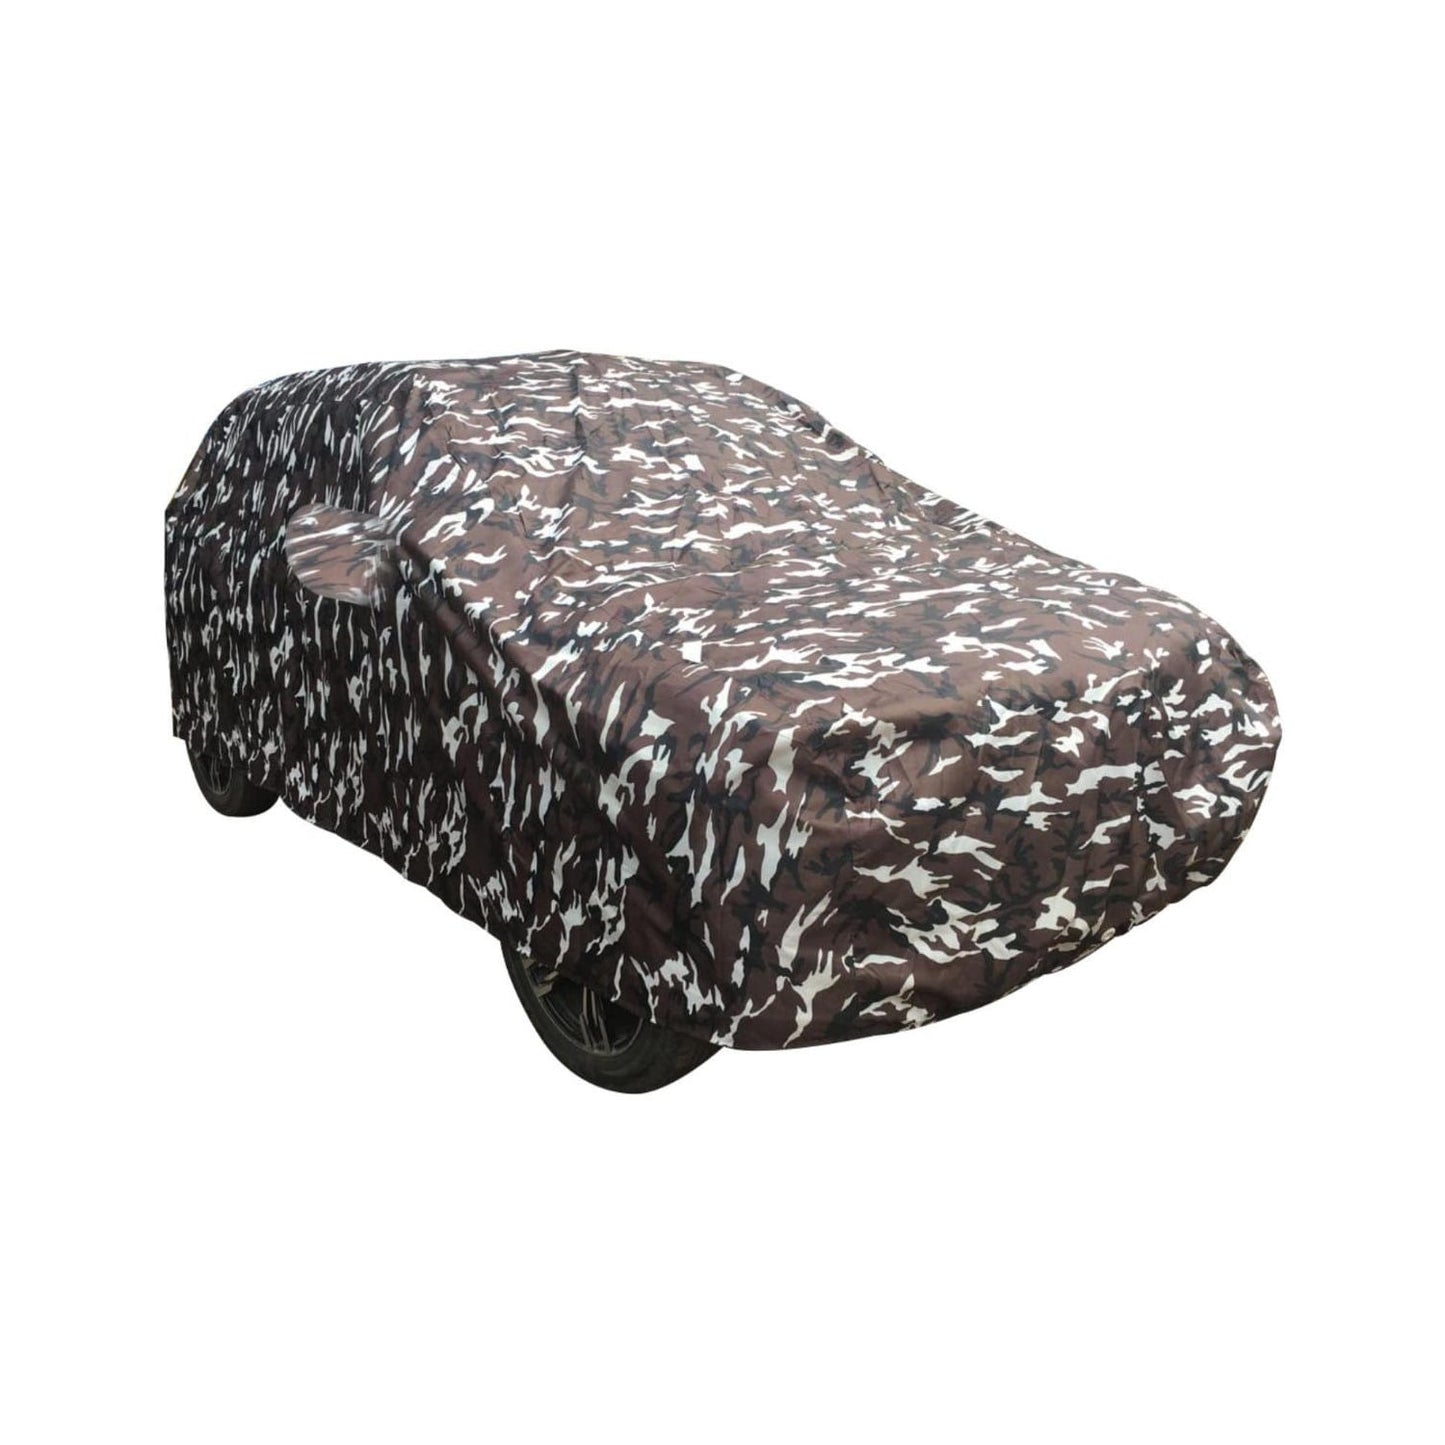 Oshotto Ranger Design Made of 100% Waterproof Fabric Multicolor Car Body Cover with Mirror Pockets For Jaguar XJ/XJL